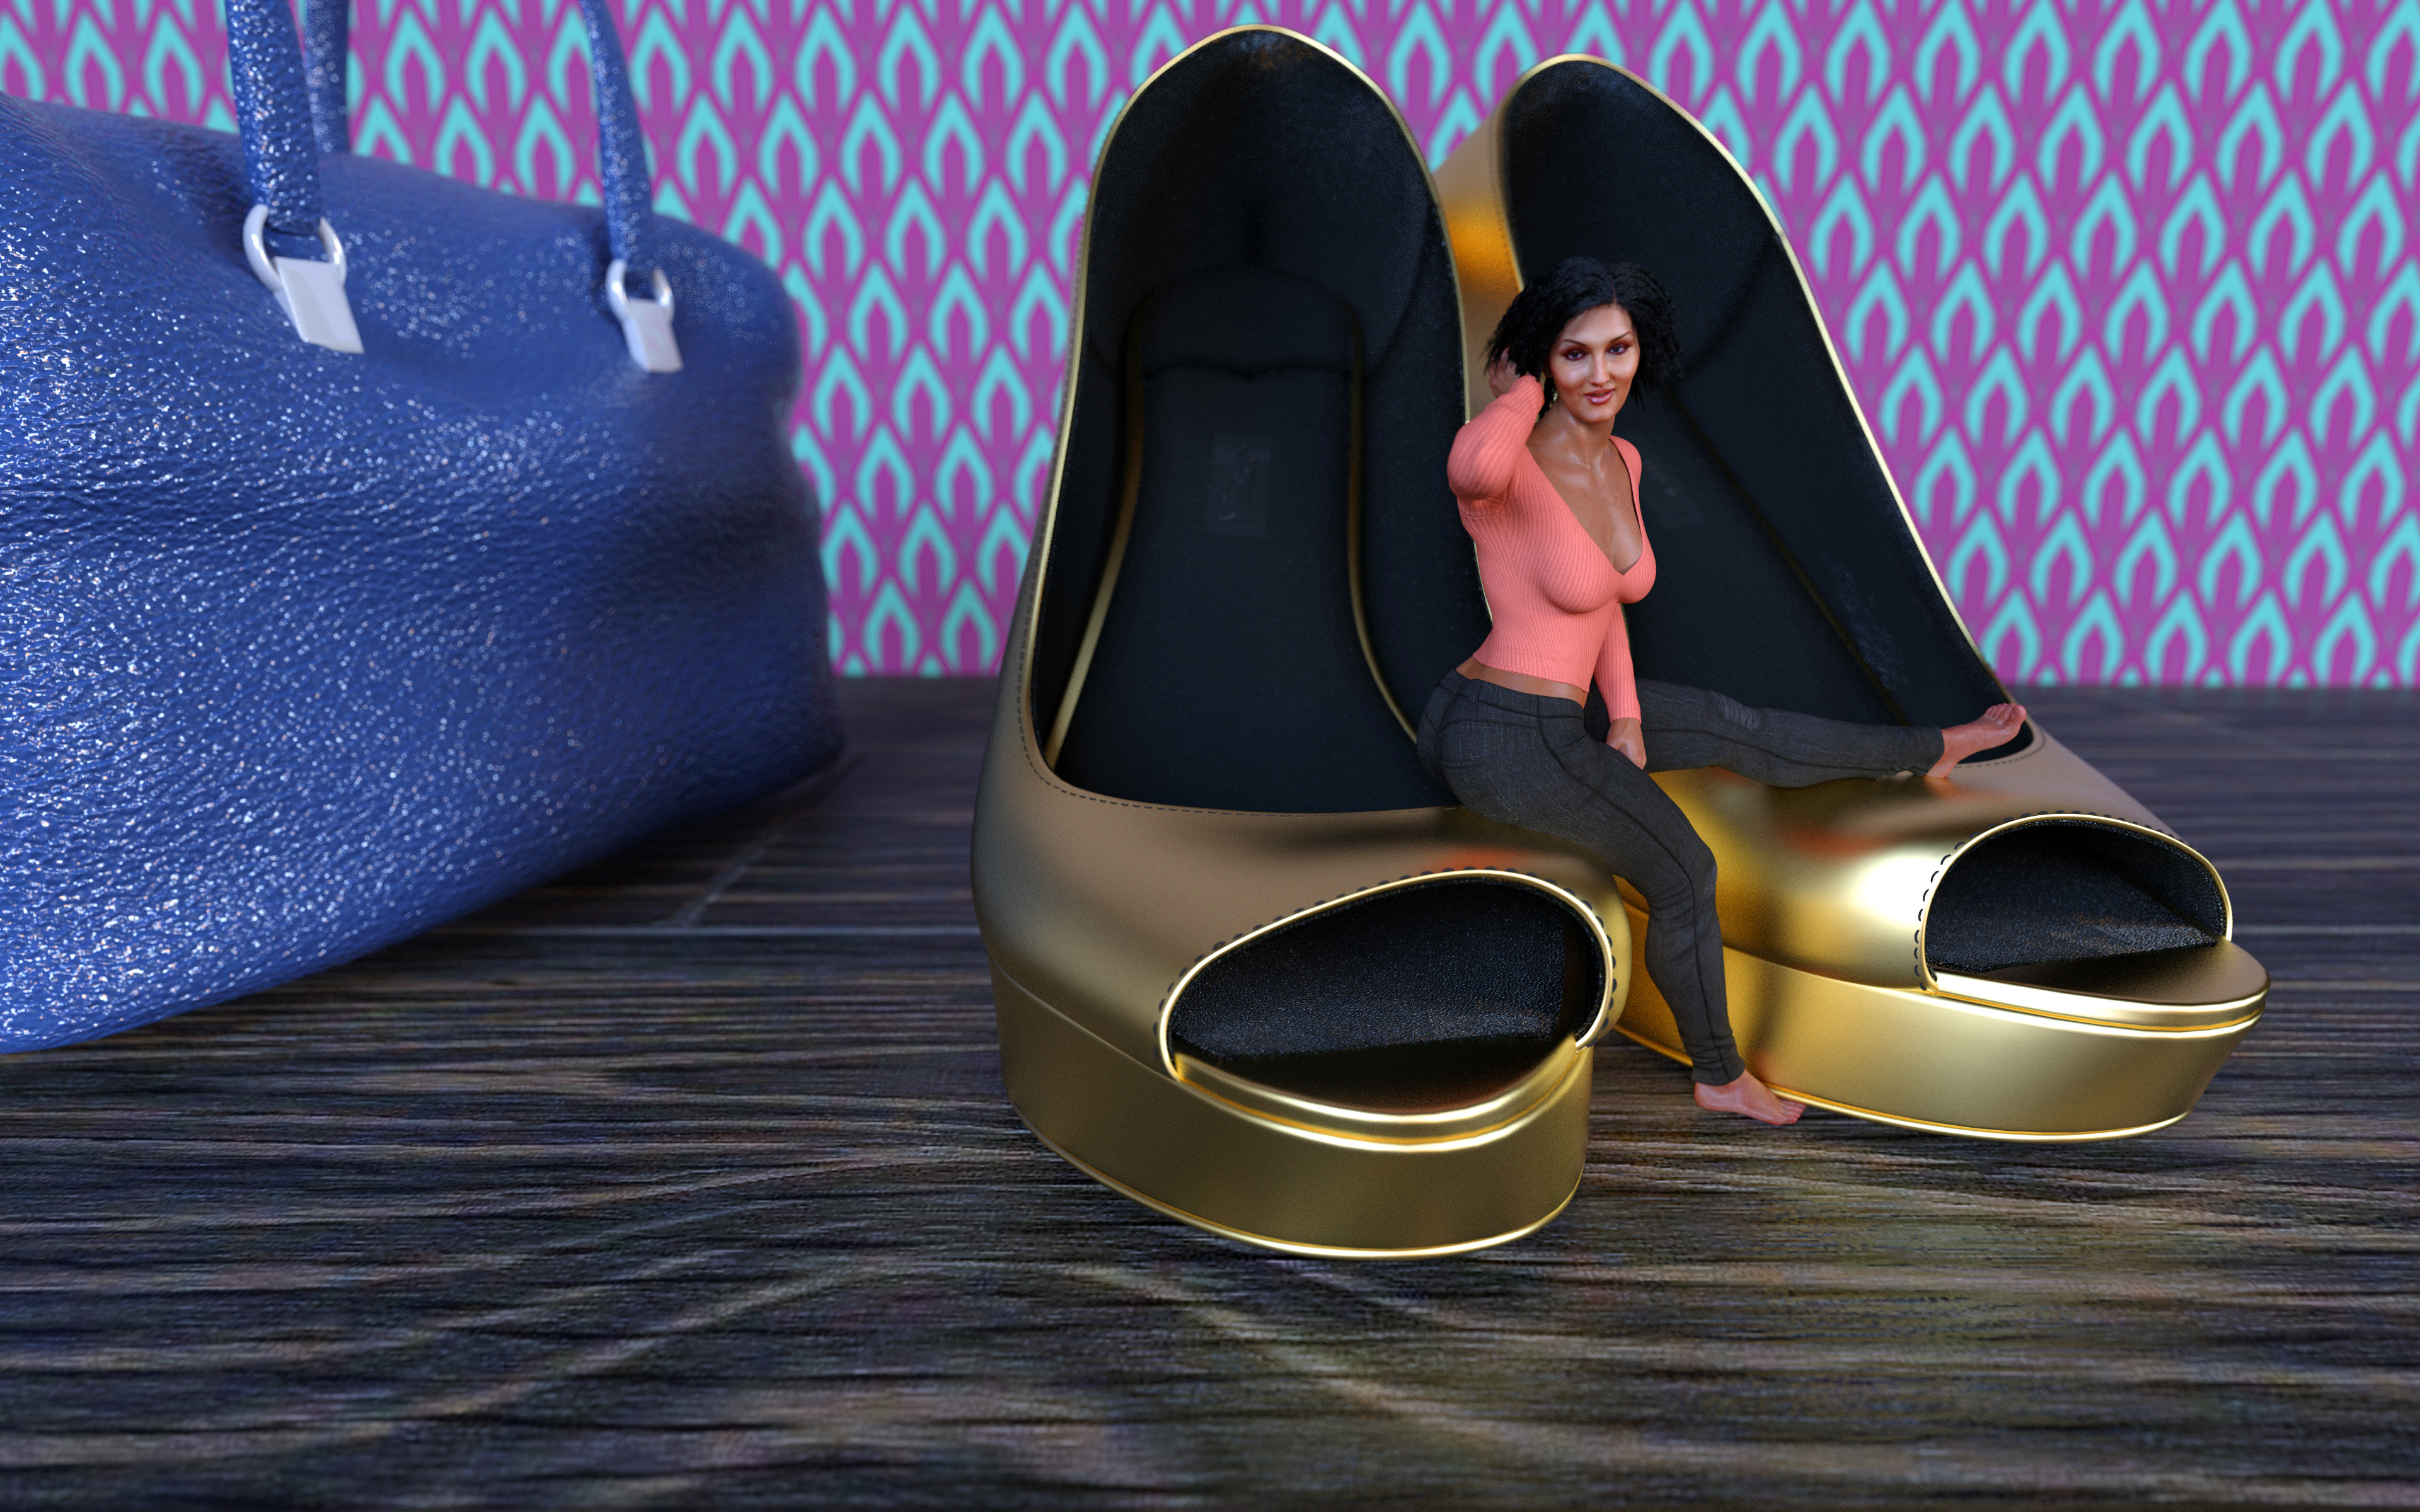 Norma rests on her shoes.jpg